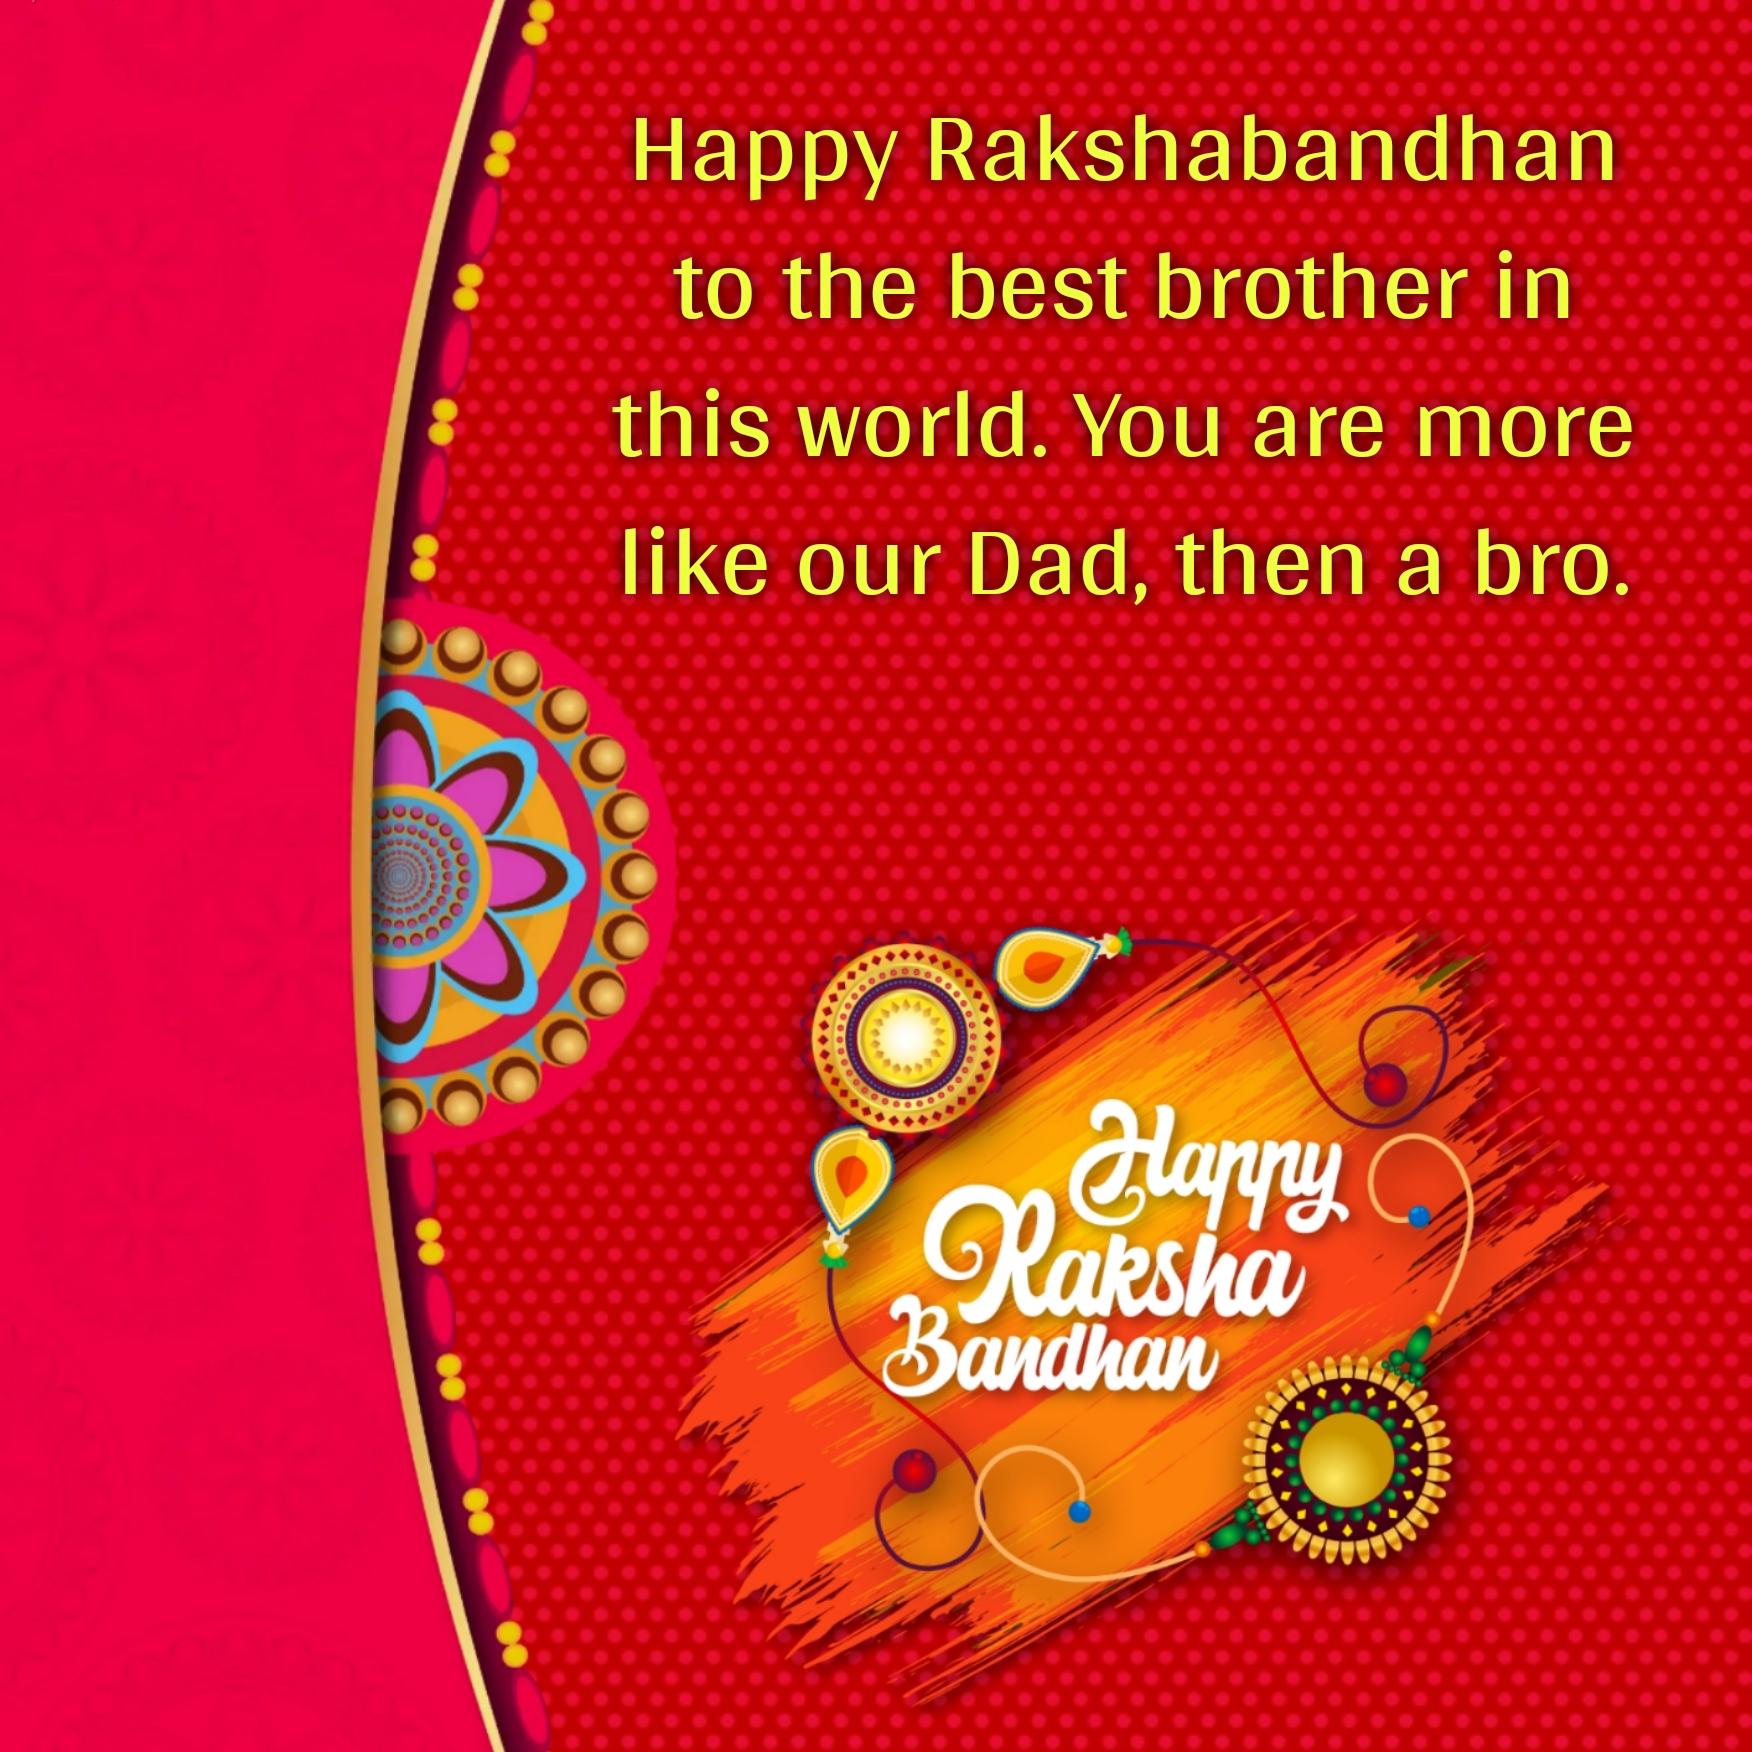 Happy Rakshabandhan to the best brother in this world